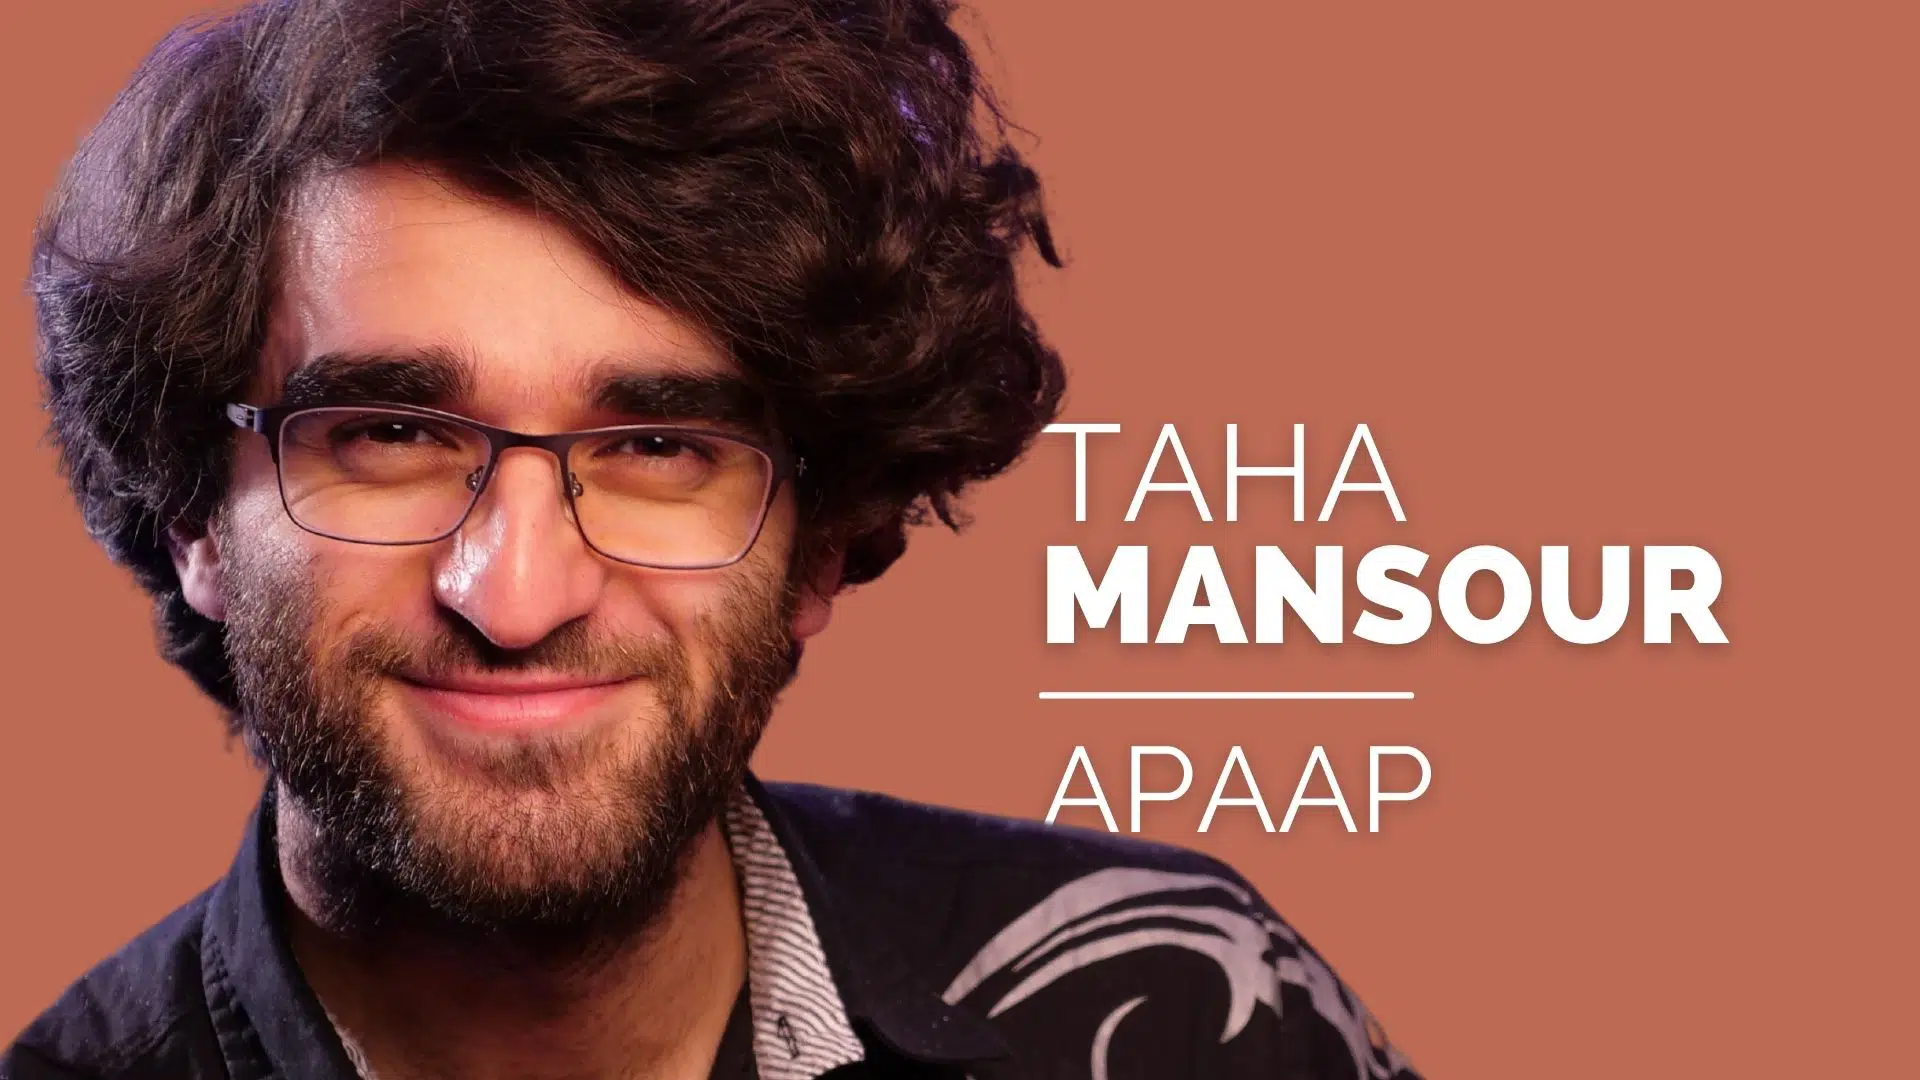 Taha MANSOUR - APAAP (French)